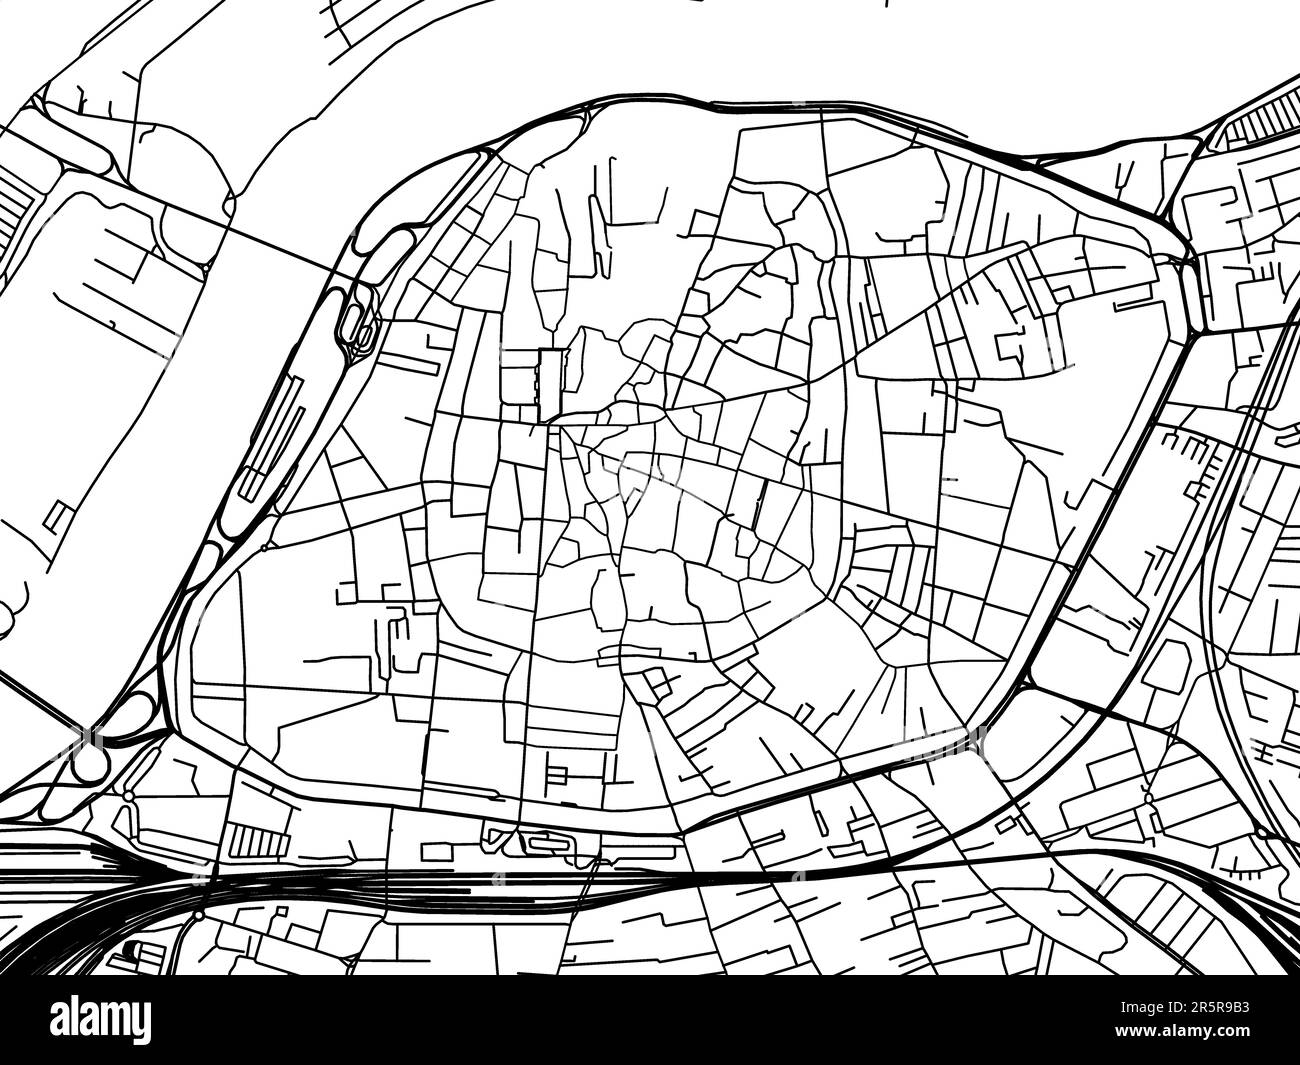 Road map of the city of Avignon Centre in France on a white background ...